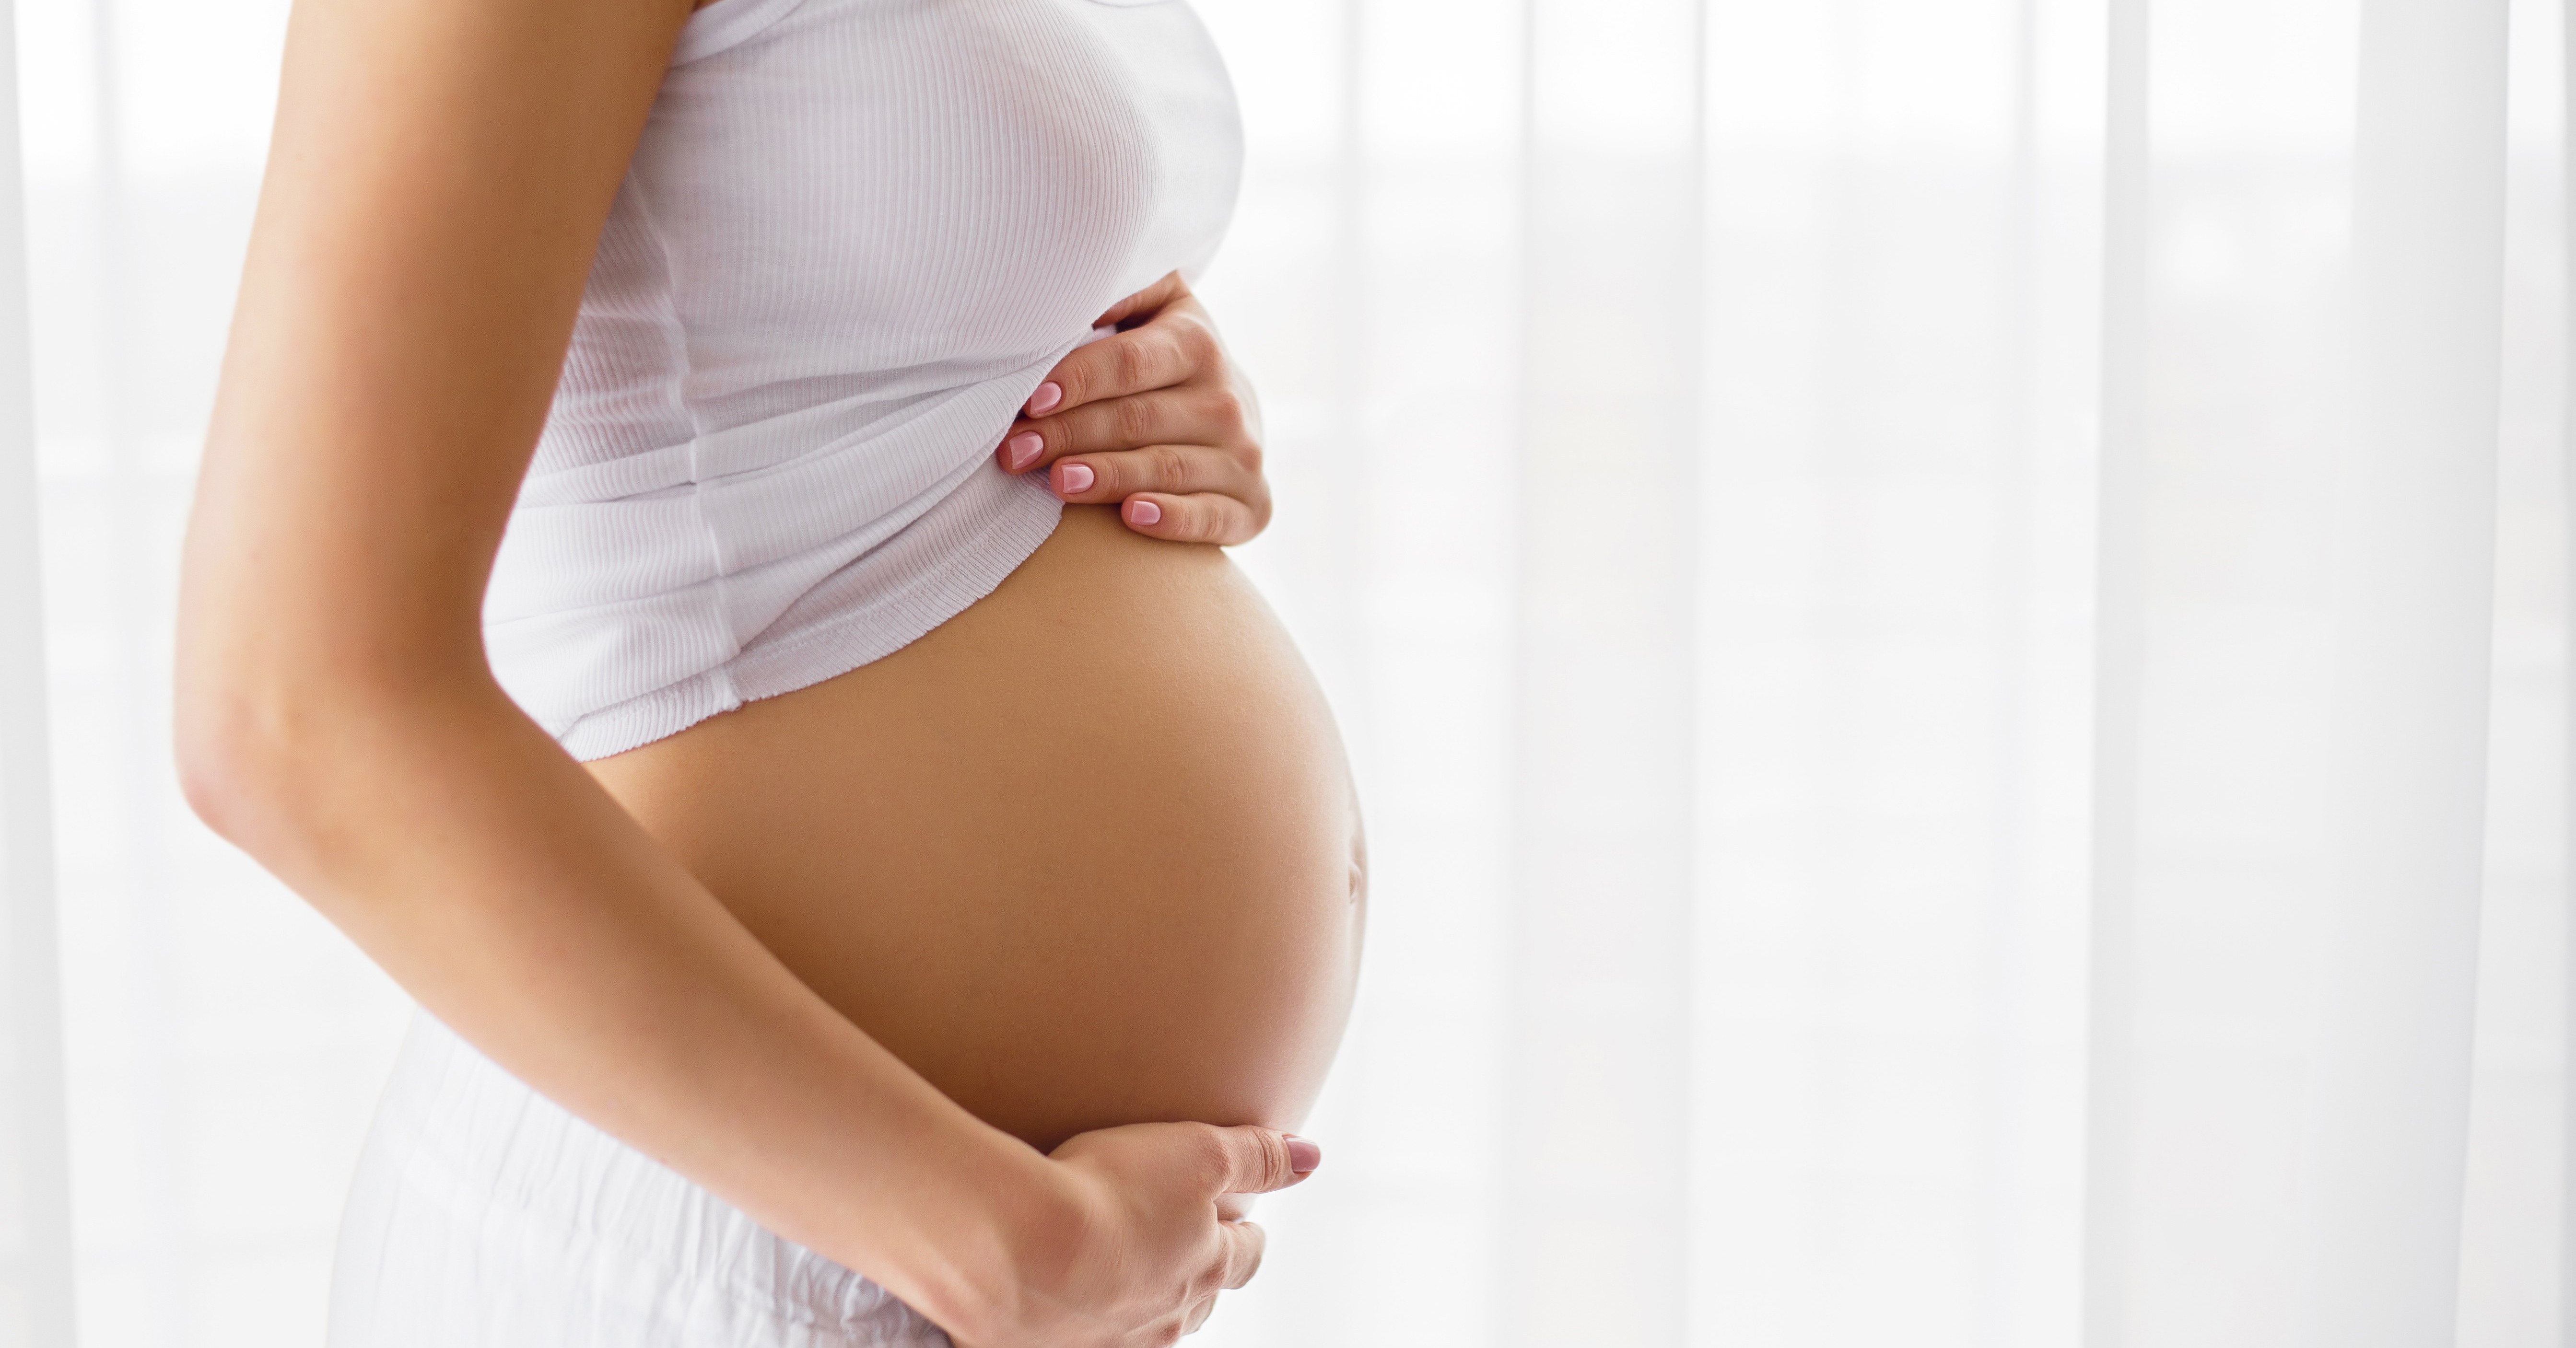 Pregnant Women Aren't Getting Adequate Nutrition, and That's Bad for ...